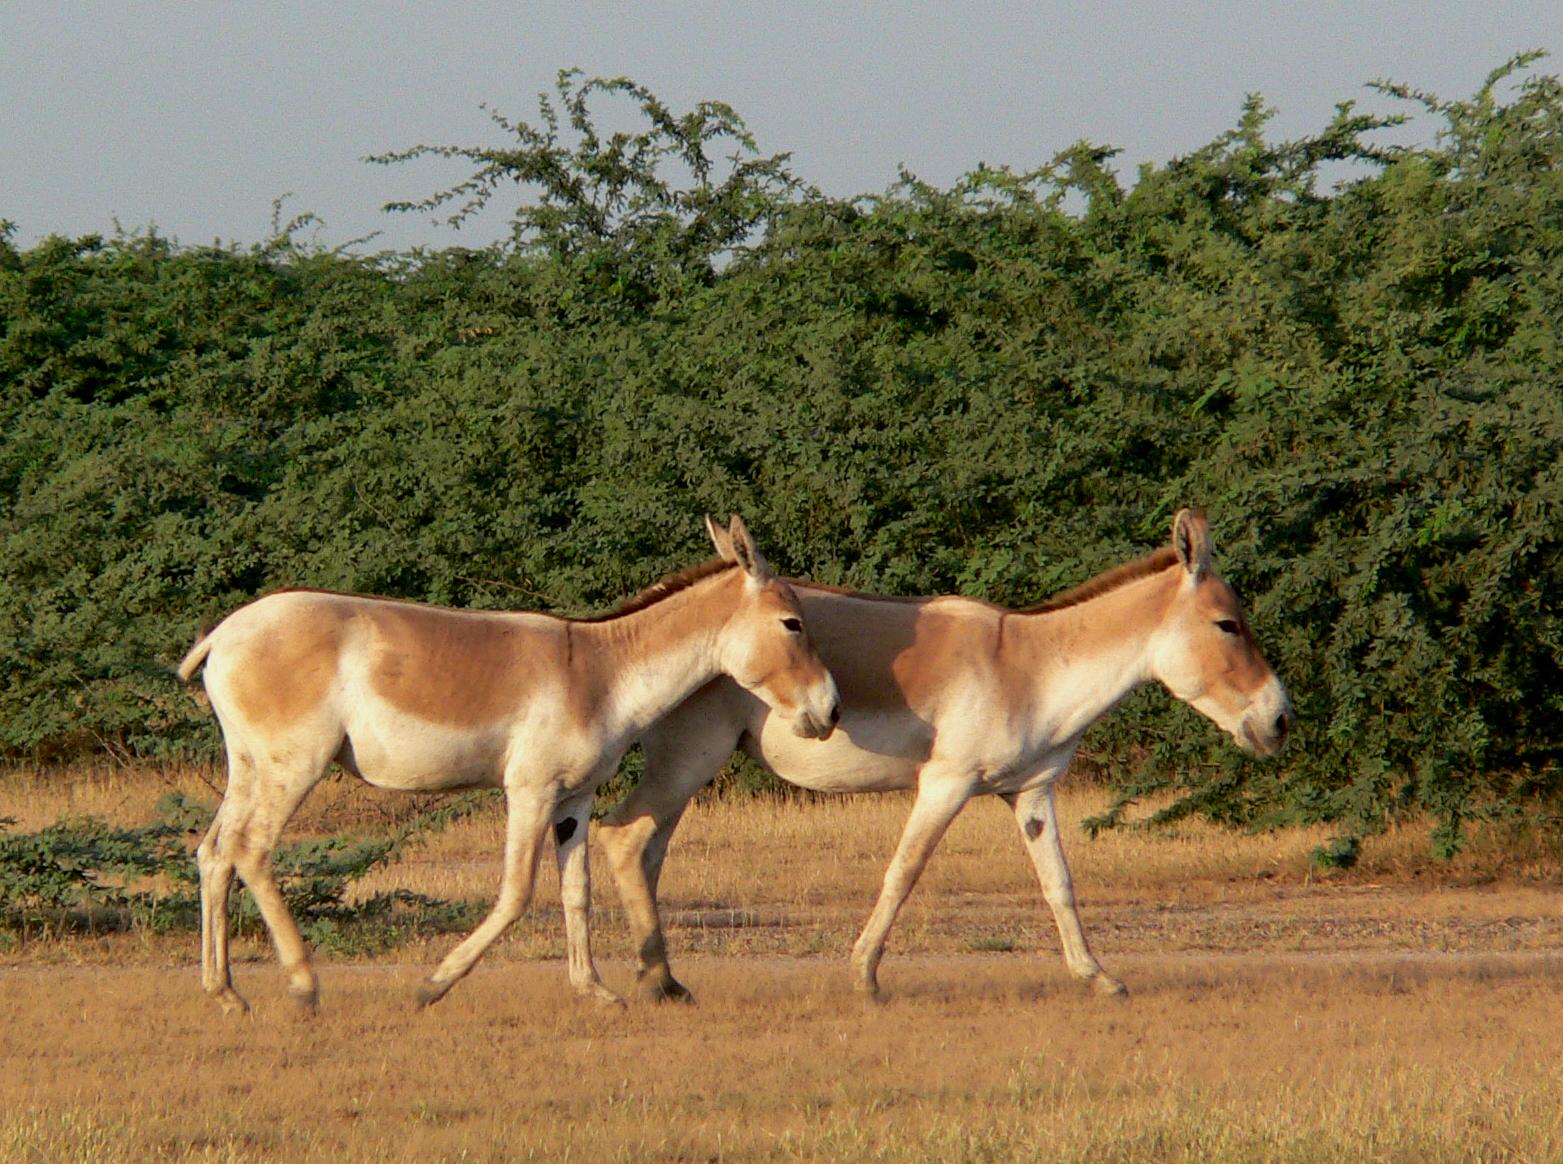 asiatic wild ass is part of the mongolia wildlife